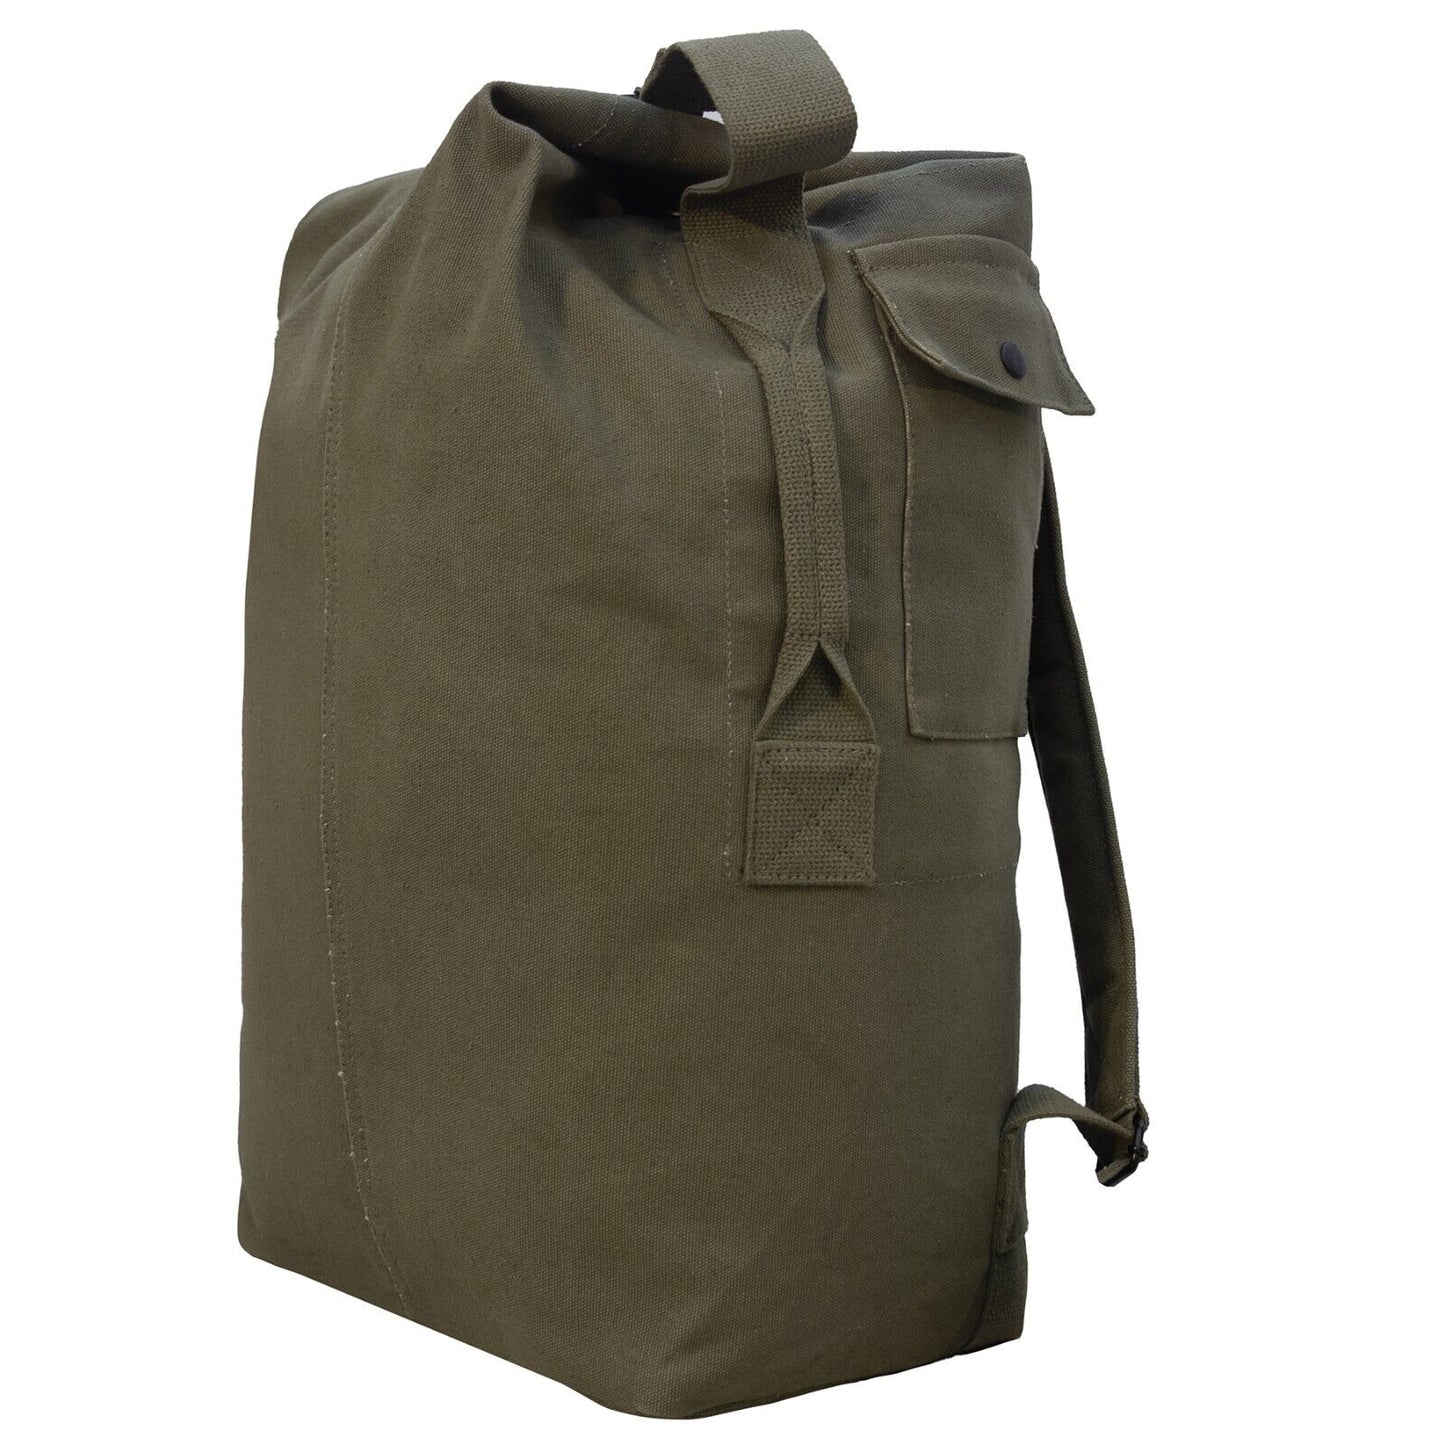 Nomad Canvas Duffle Backpack Travel Bag